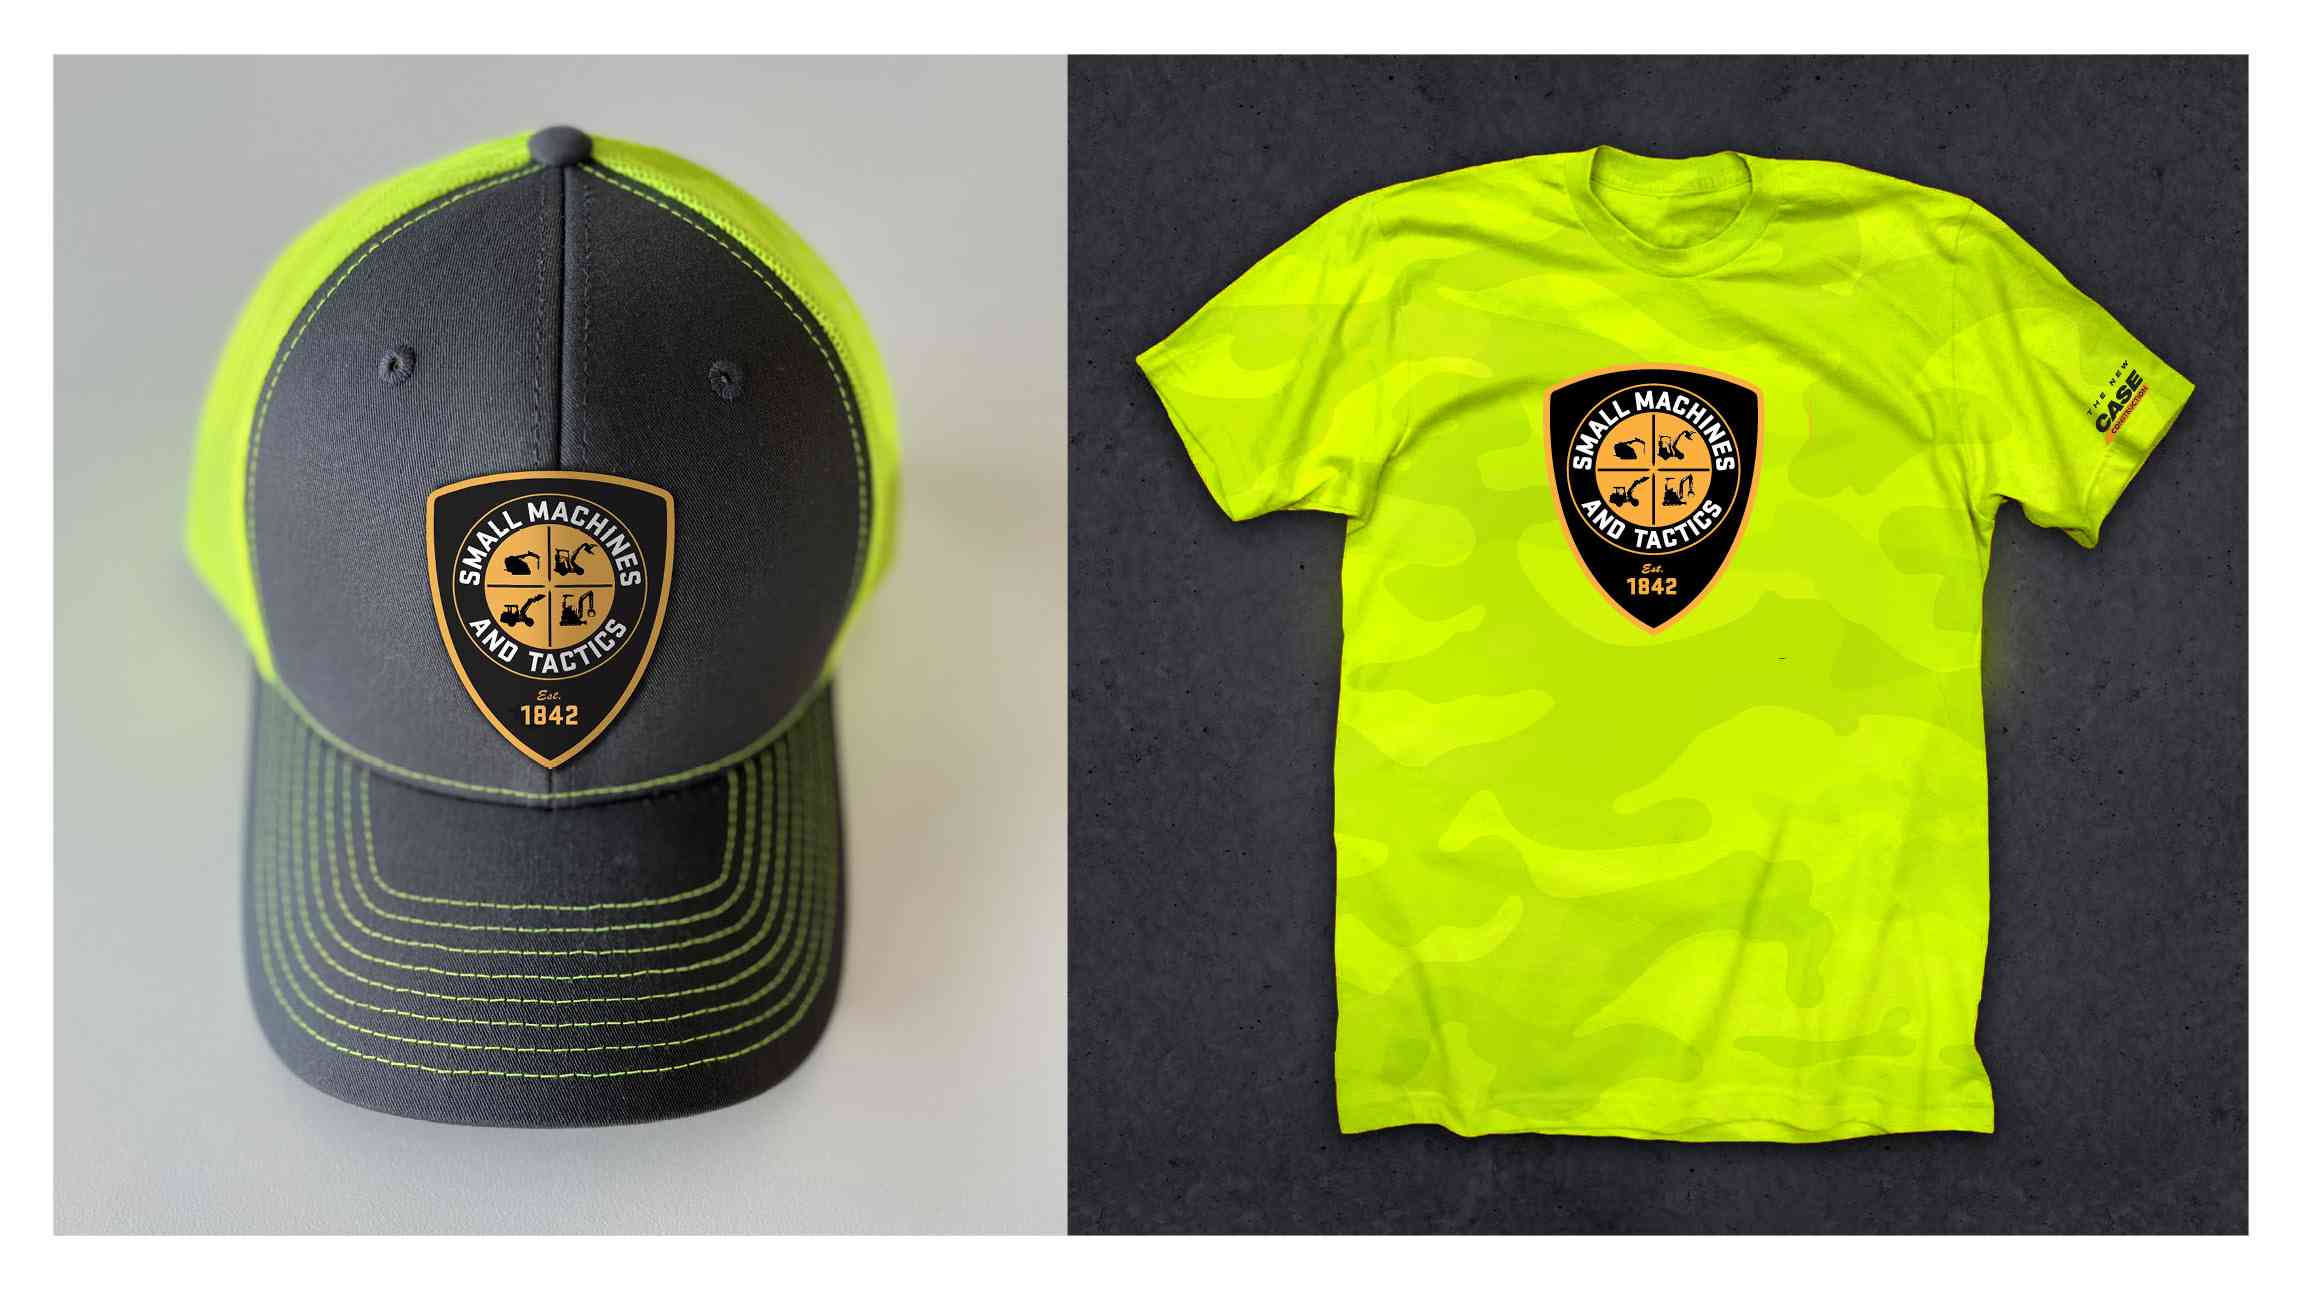 Cap and Shirt of CASE Construction.